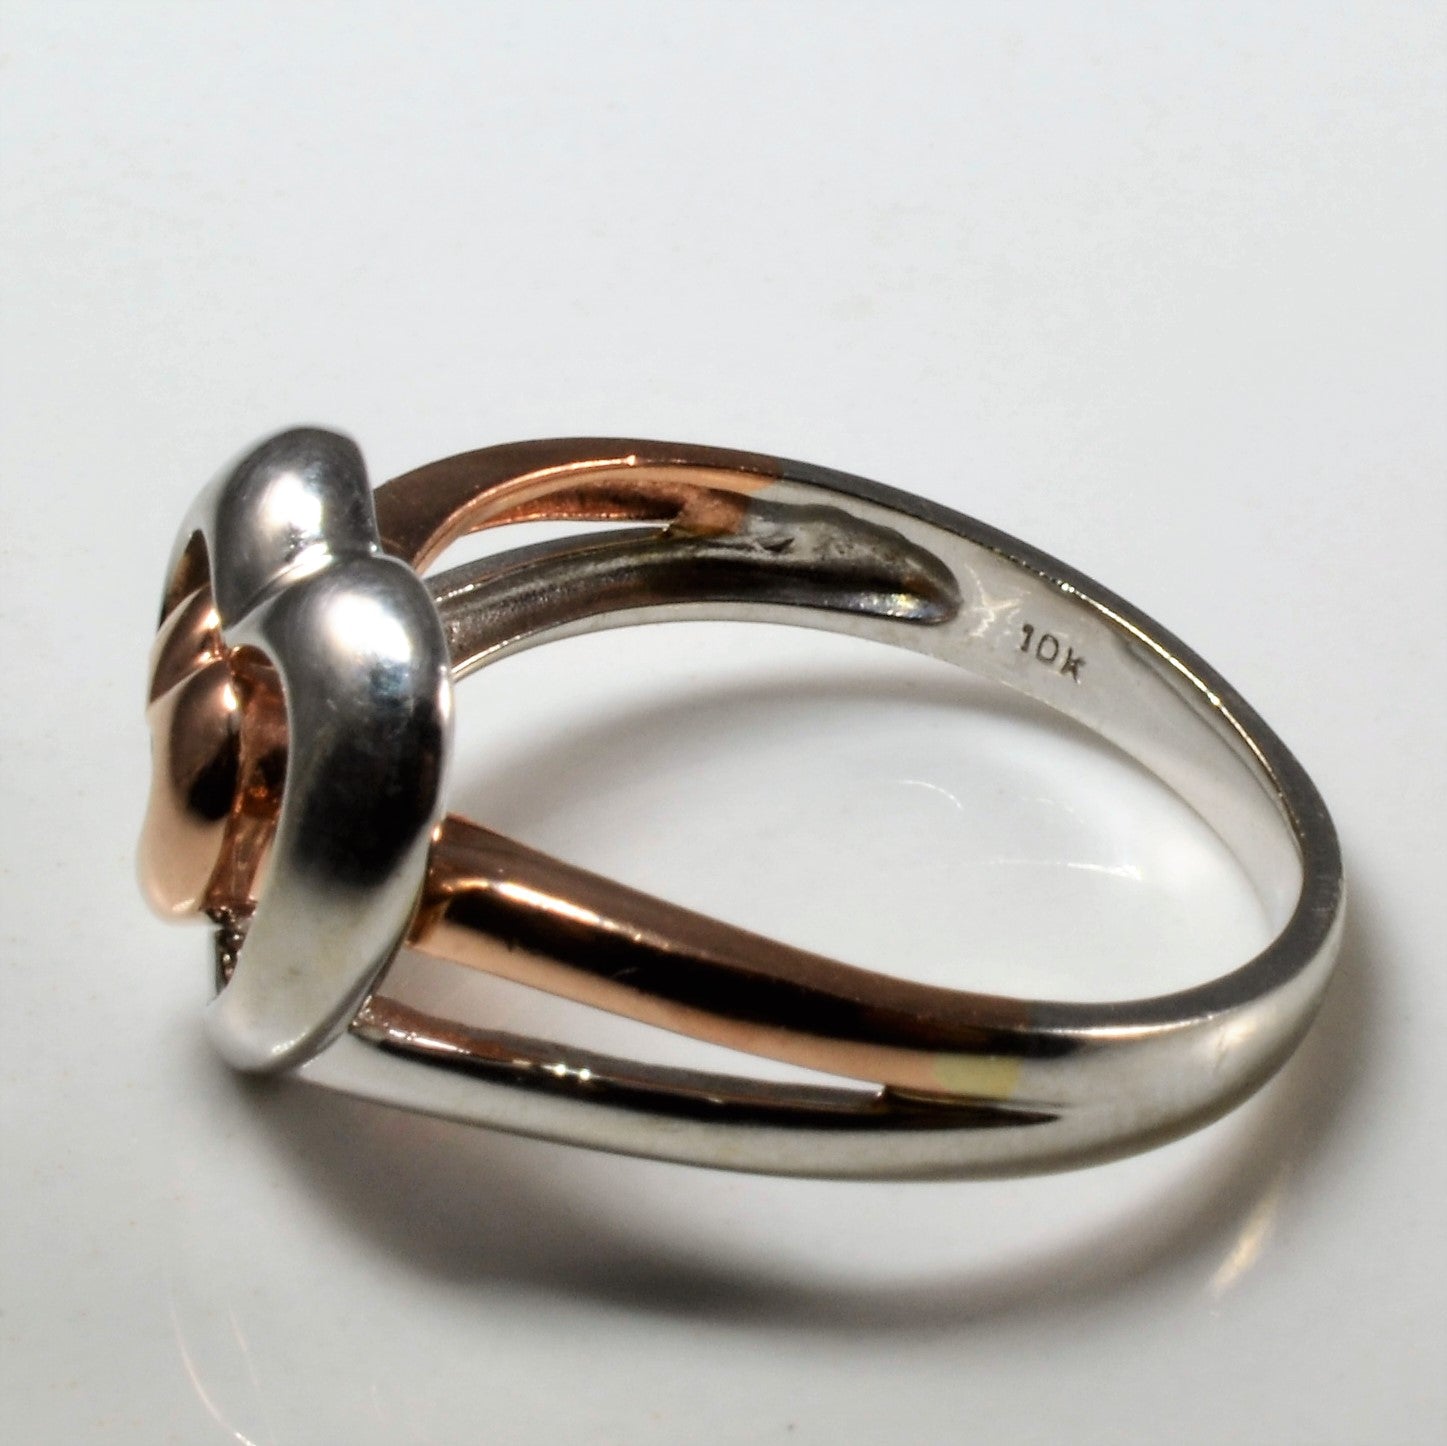 Two Tone Double Heart Ring | SZ 6.5 |